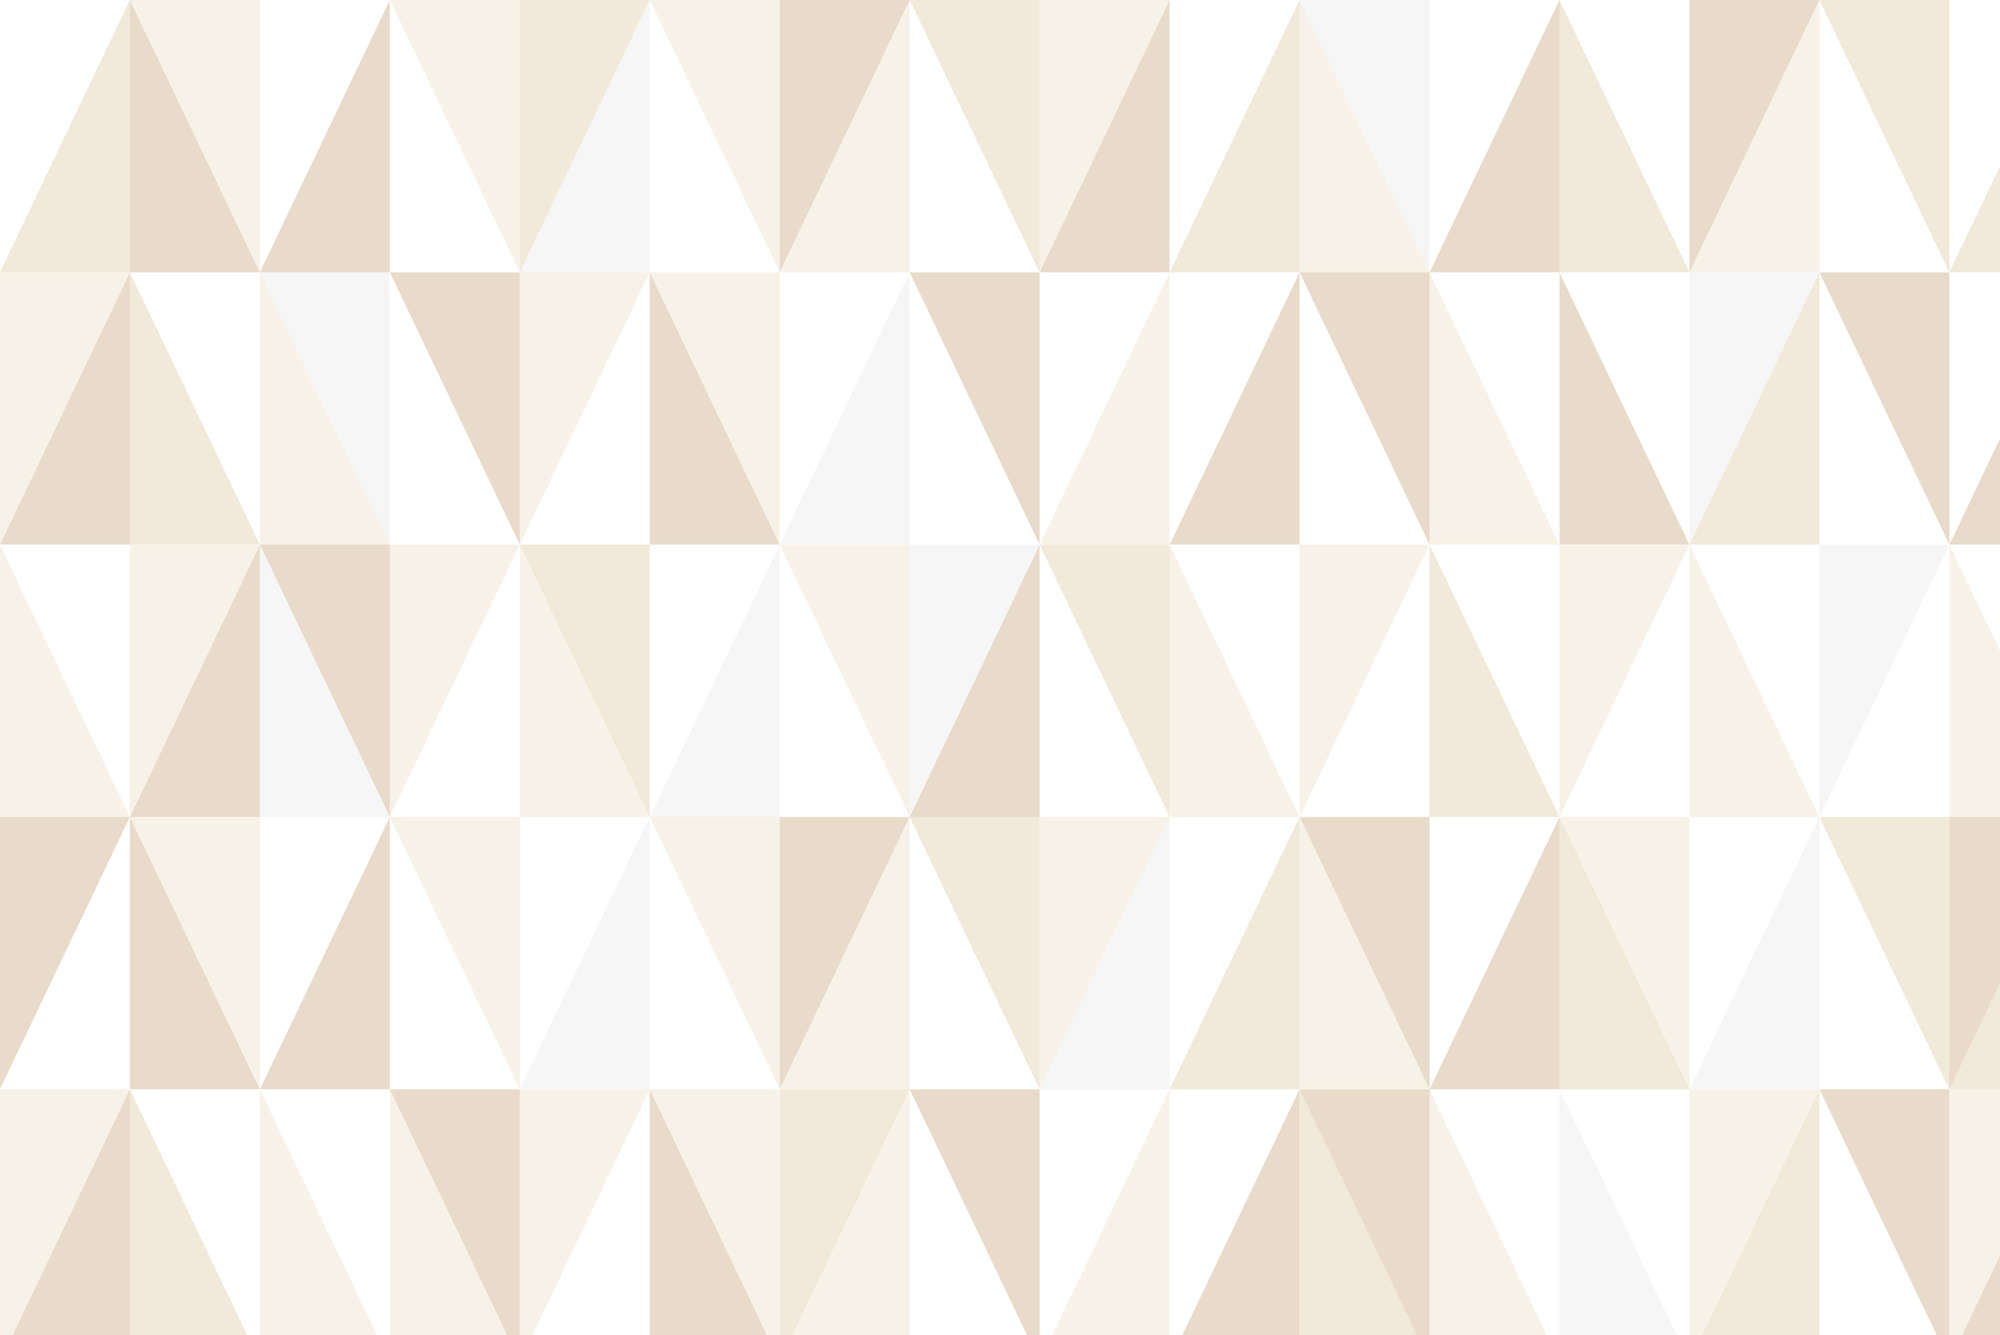             Design wall mural with small triangles grey on textured non-woven
        